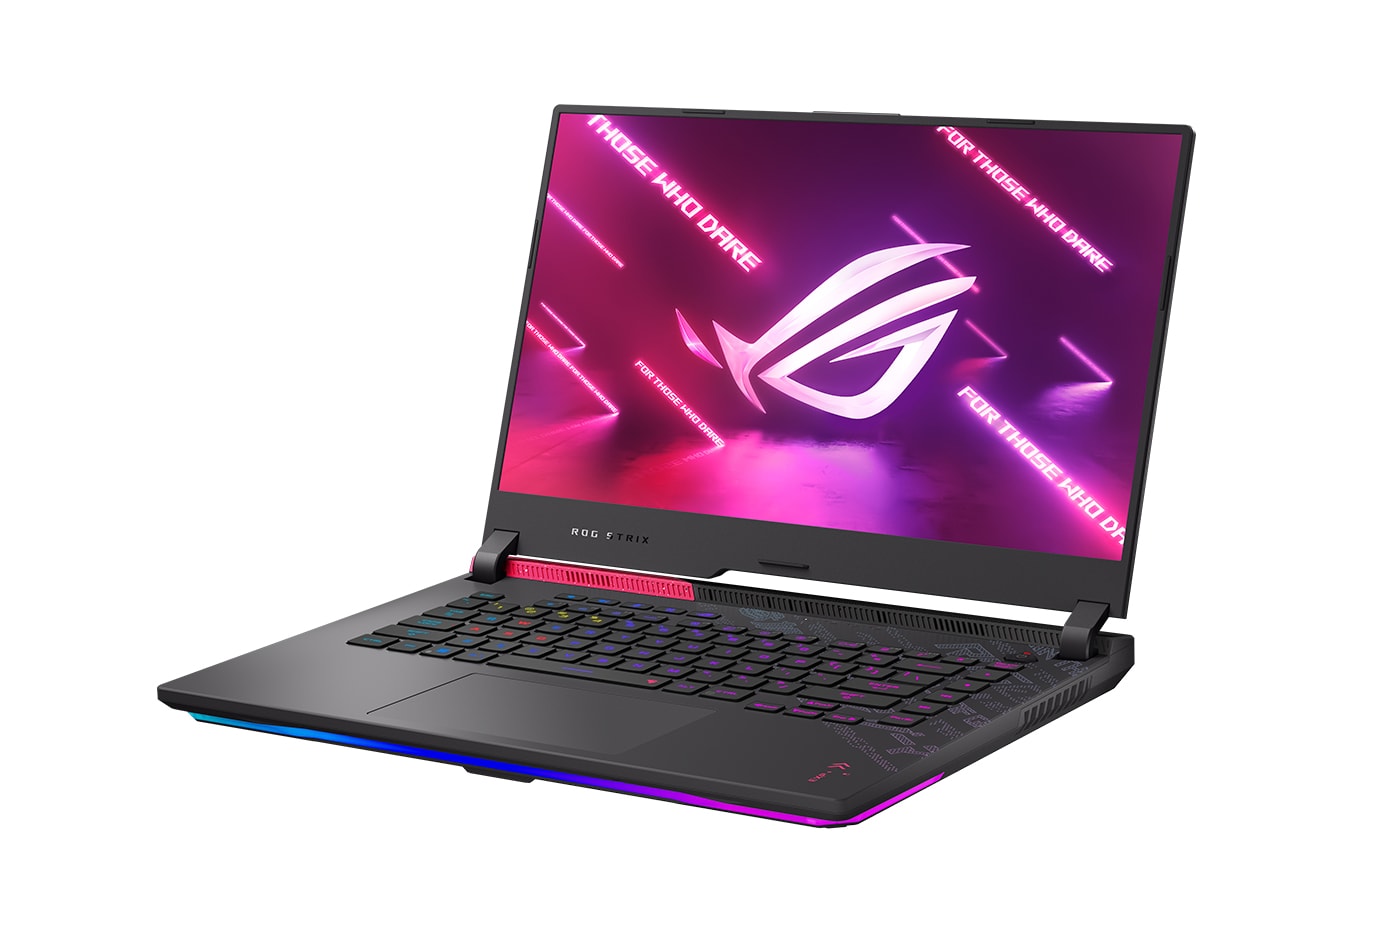 asus republic of gamers gaming laptops ces 2021 release announcements g15 x13 scar 15 17 